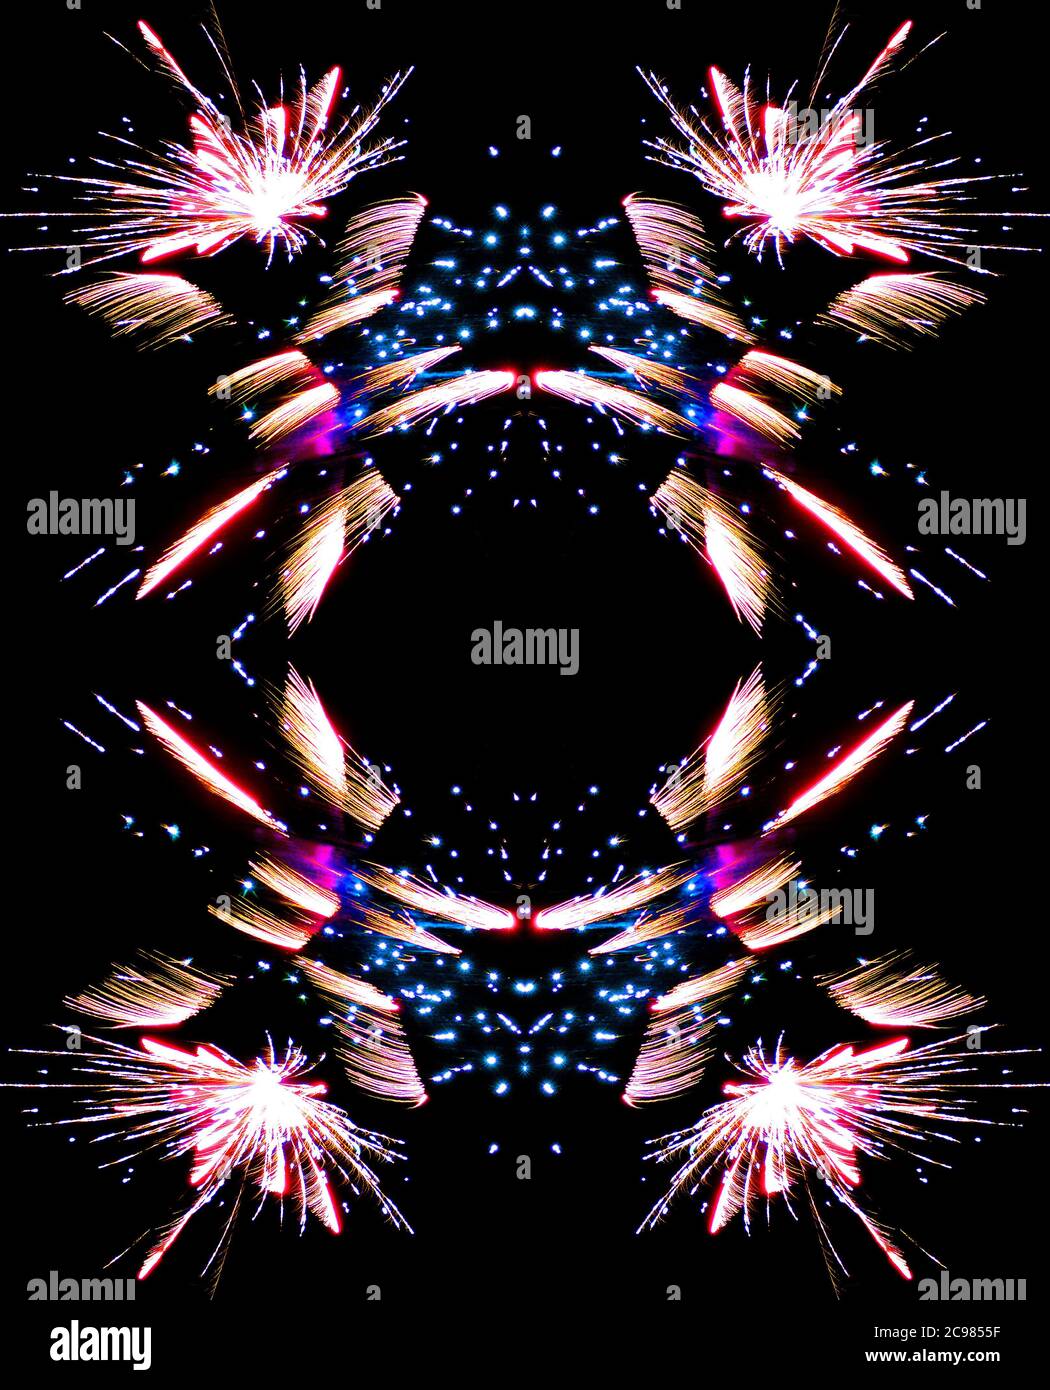 Fireworks - repeating pattern made from a digitally reflected image of fireworks exploding Stock Photo